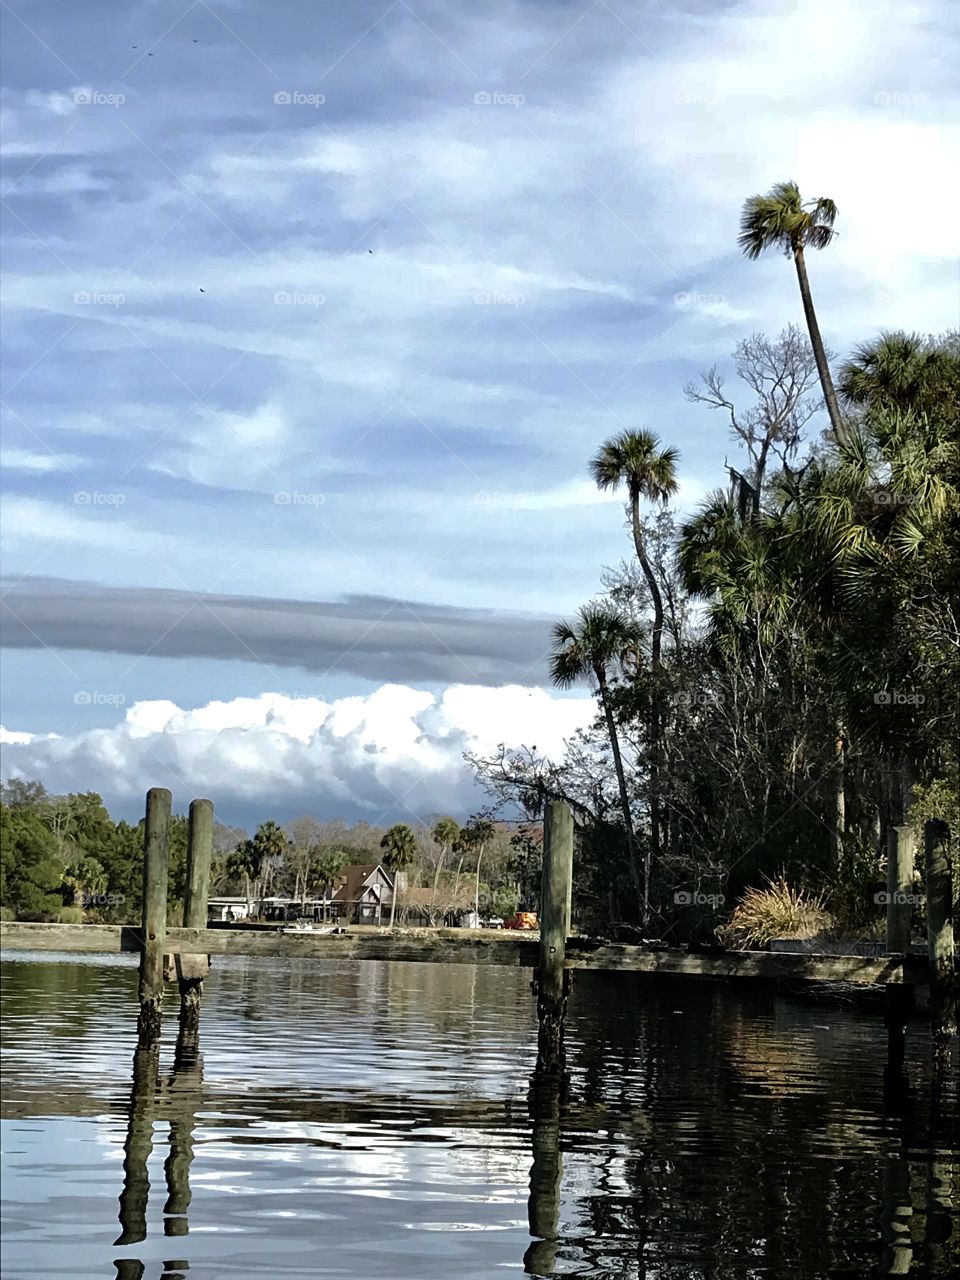 The three tall palm trees overlooking a dock in the river 